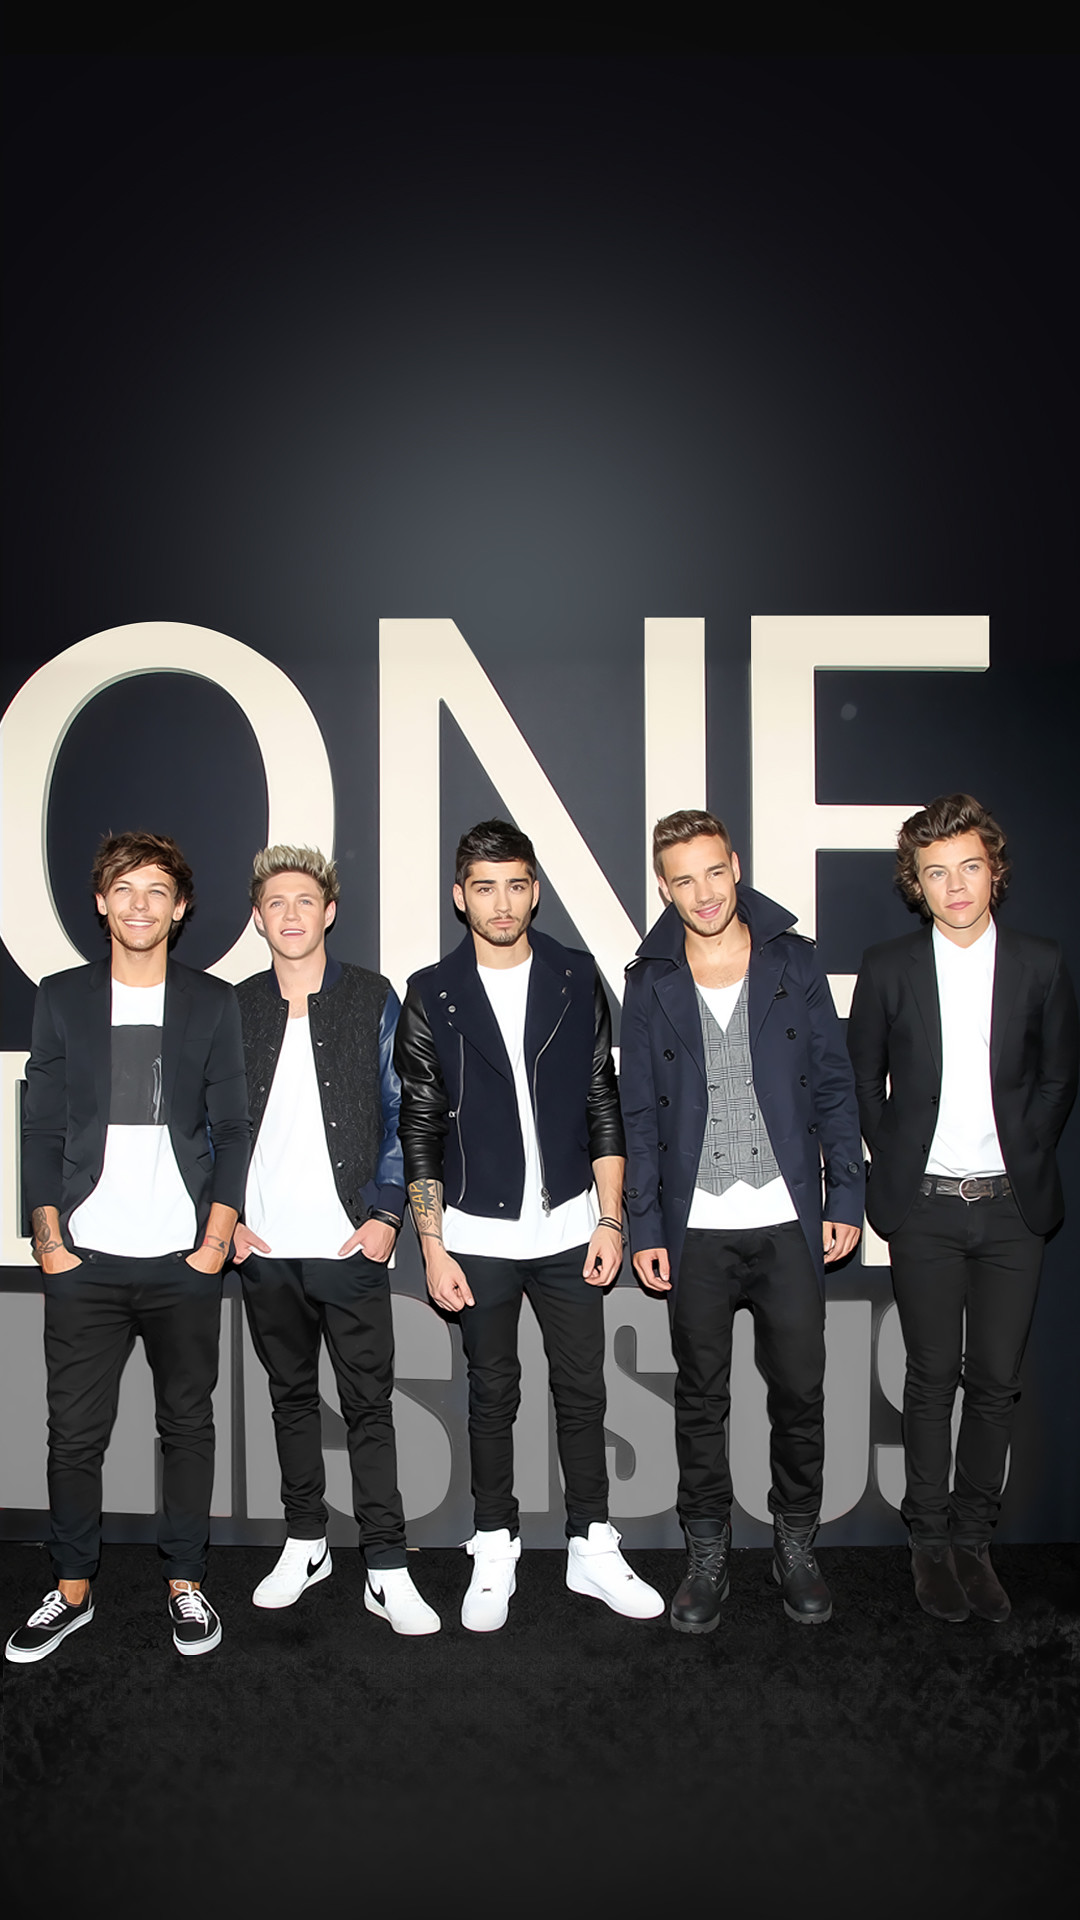 1080x1920 One Direction wallpaper for mobile phones One Direction 